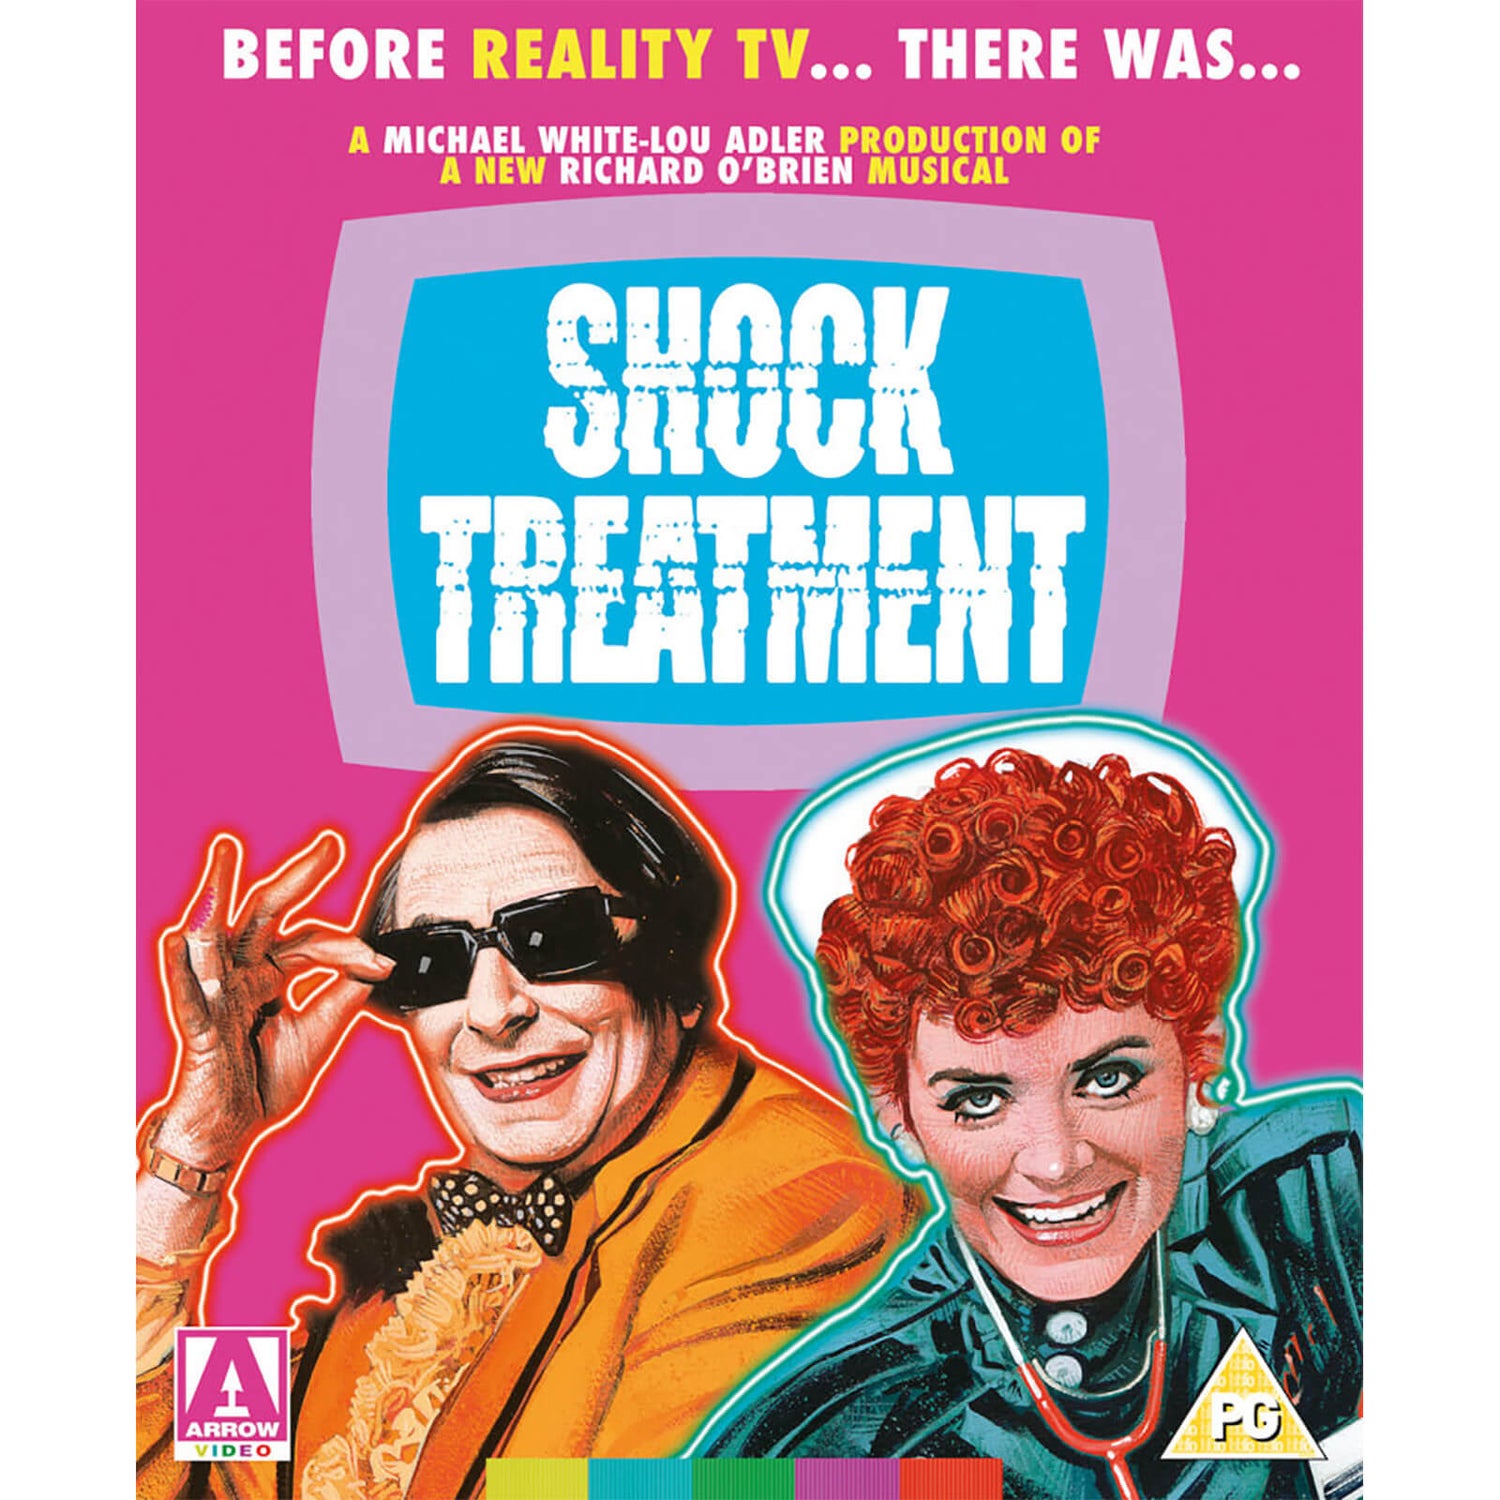 Shock Treatment 'Nation' Limited Edition